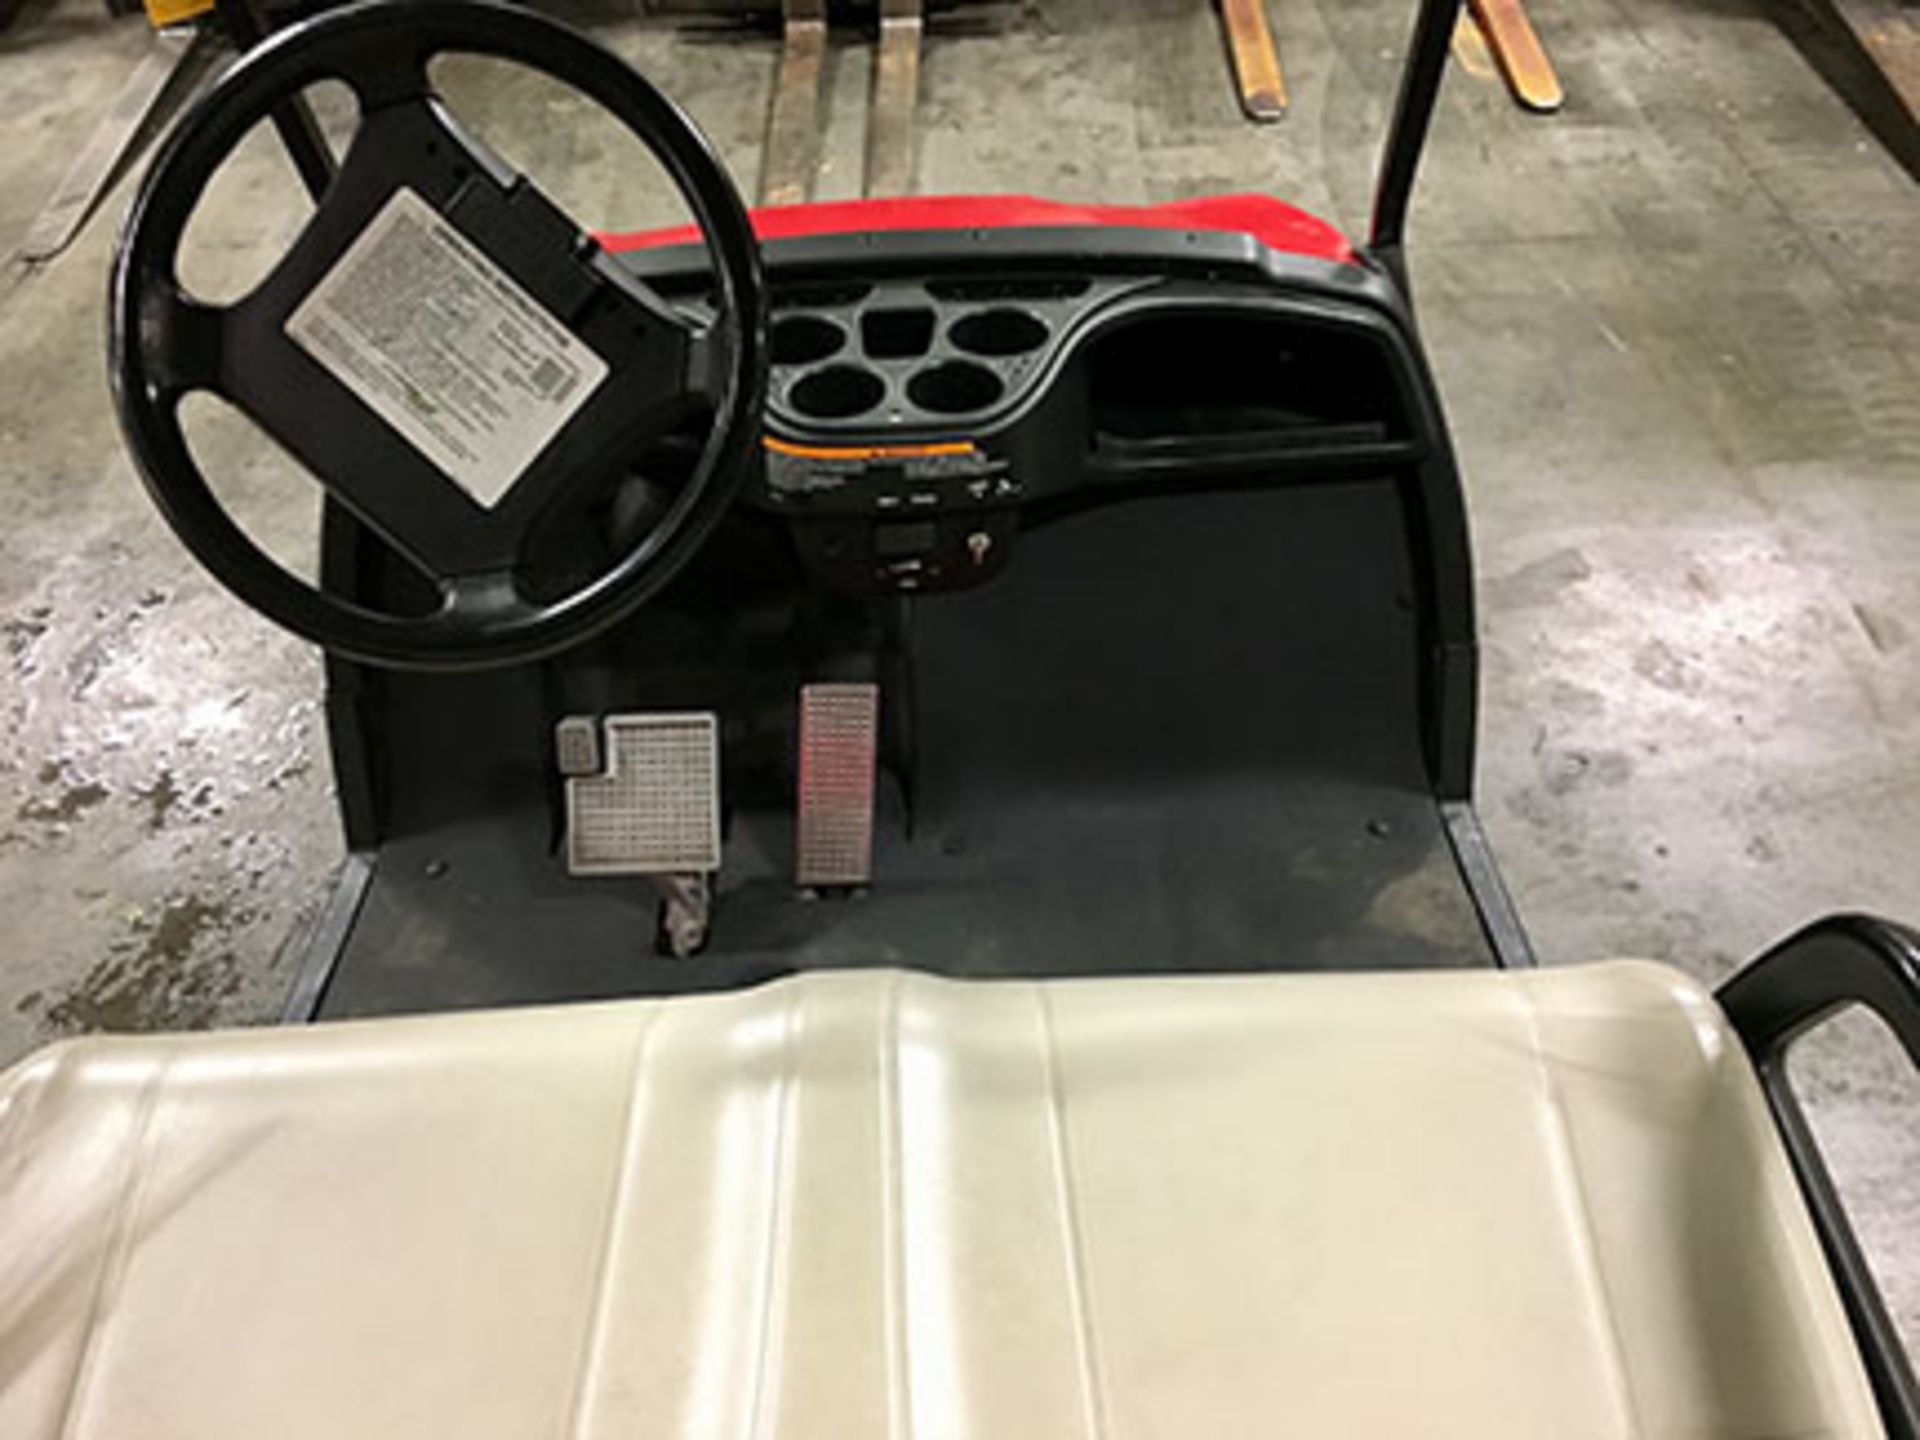 2009 YAMAHA ELECTRIC GOLF CART, WITH 48 VOLT CHARGER, 4-PASSENGER FOLD DOWN SEAT, LIFT KIT, - Image 4 of 5